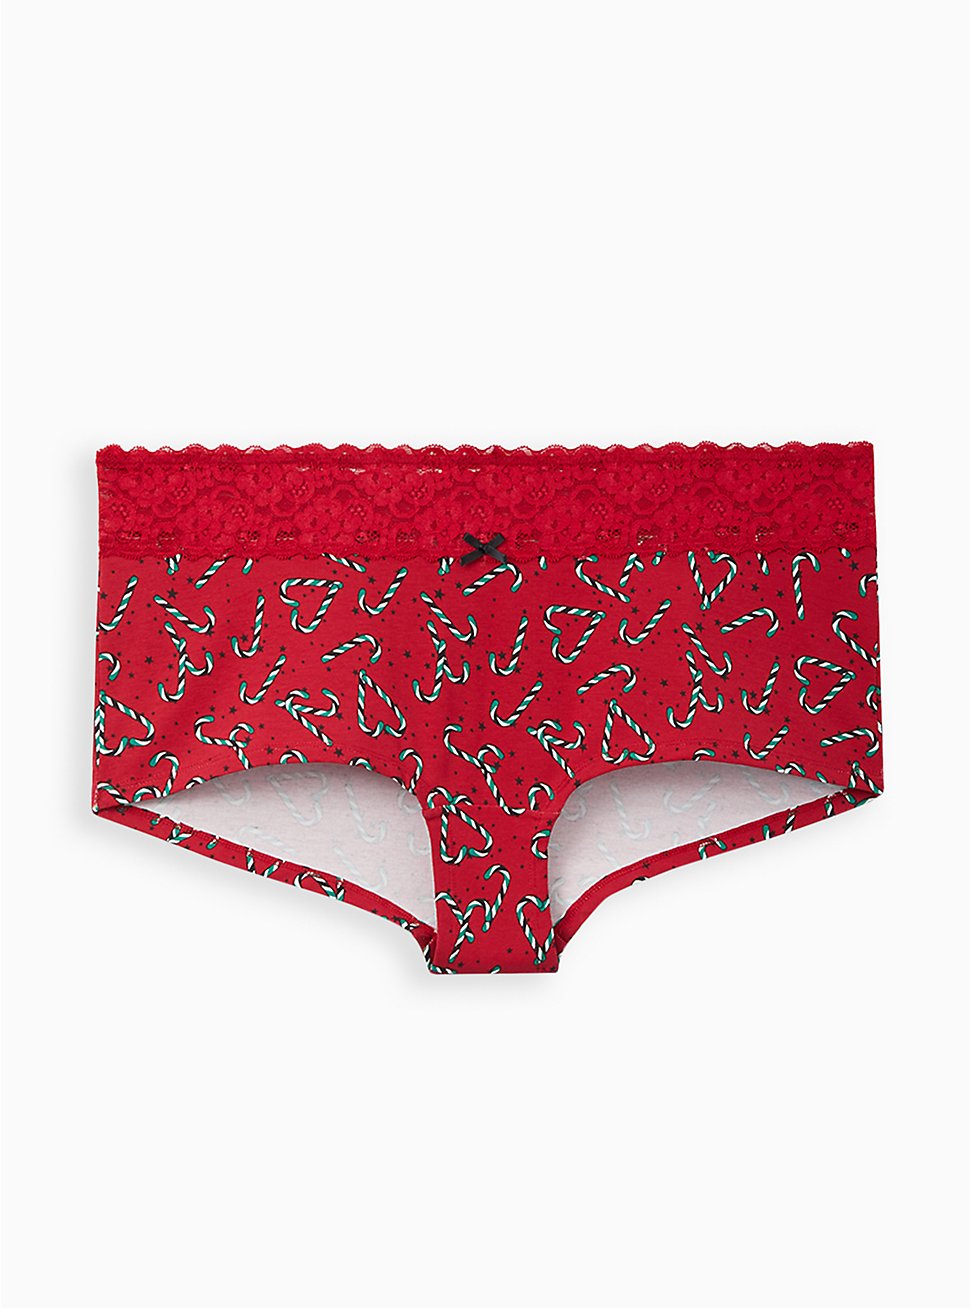 Wide Lace Trim Boyshort Panty - Cotton Candy Cane Red, CANDY CANES, hi-res